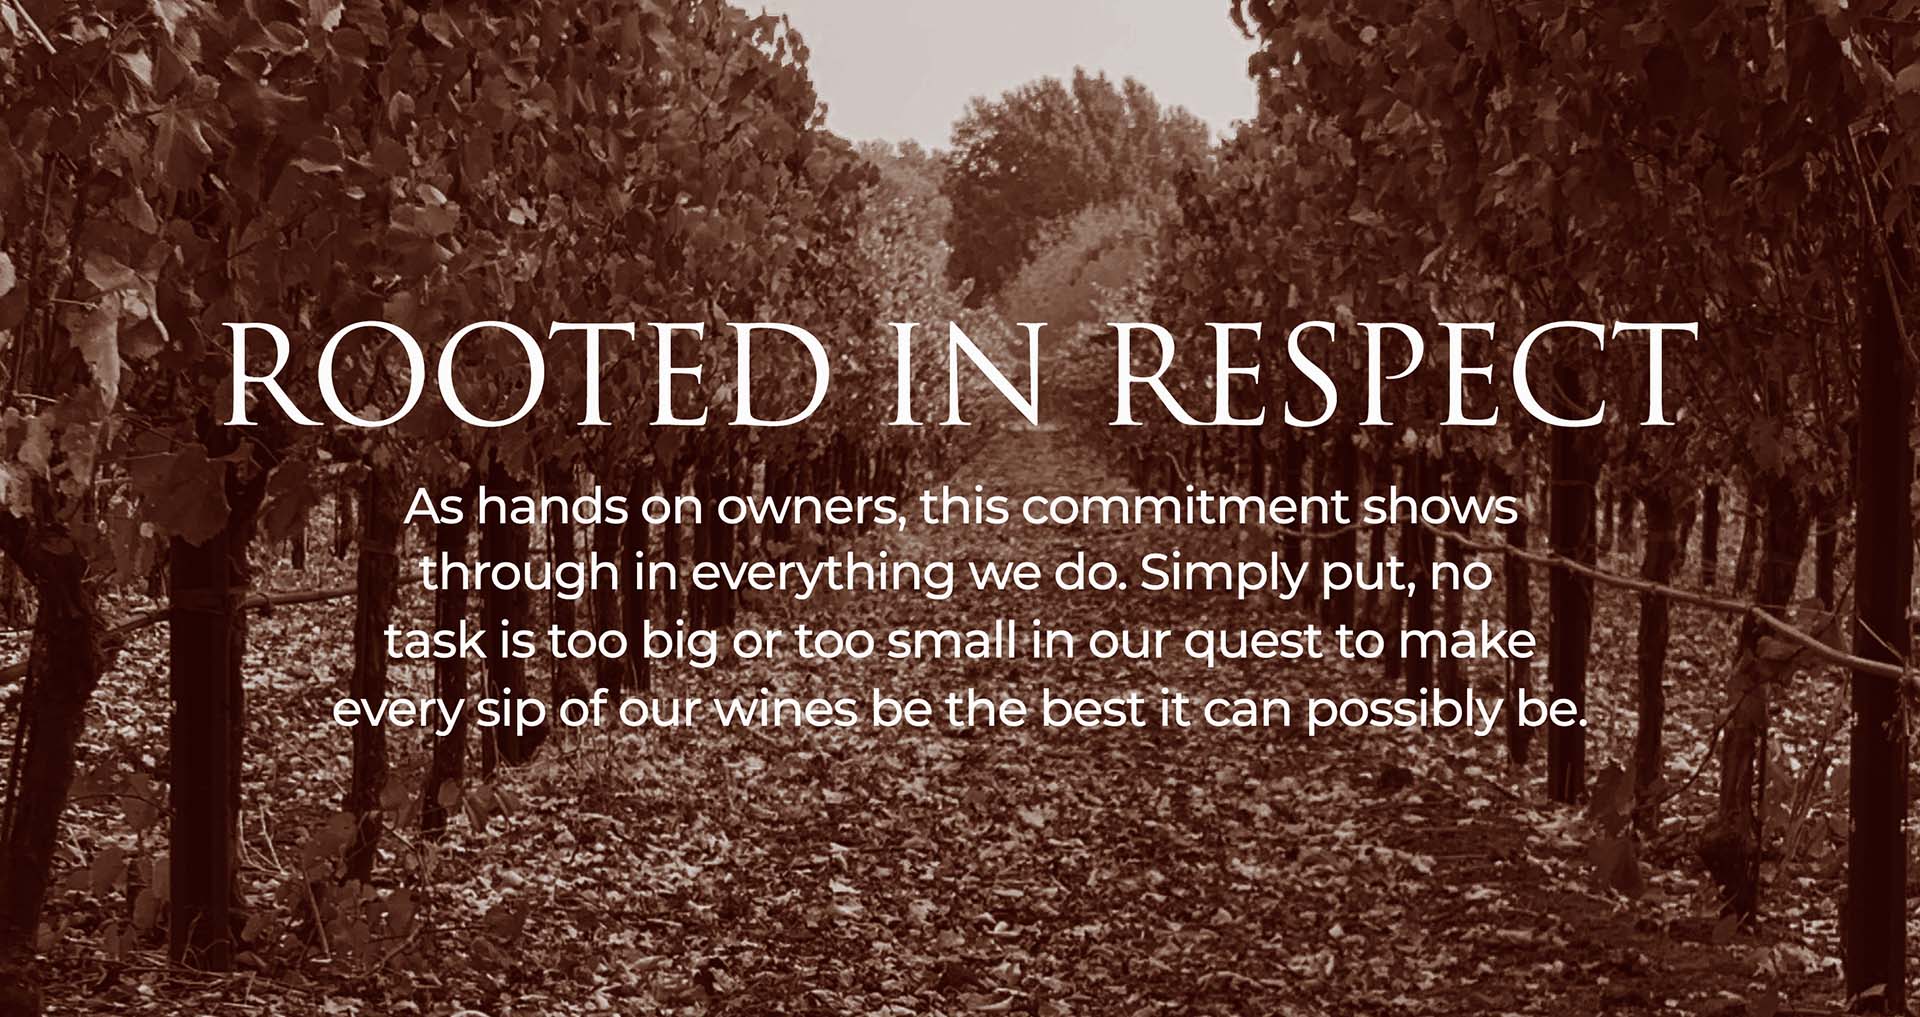 Rooted in Respect mission statement